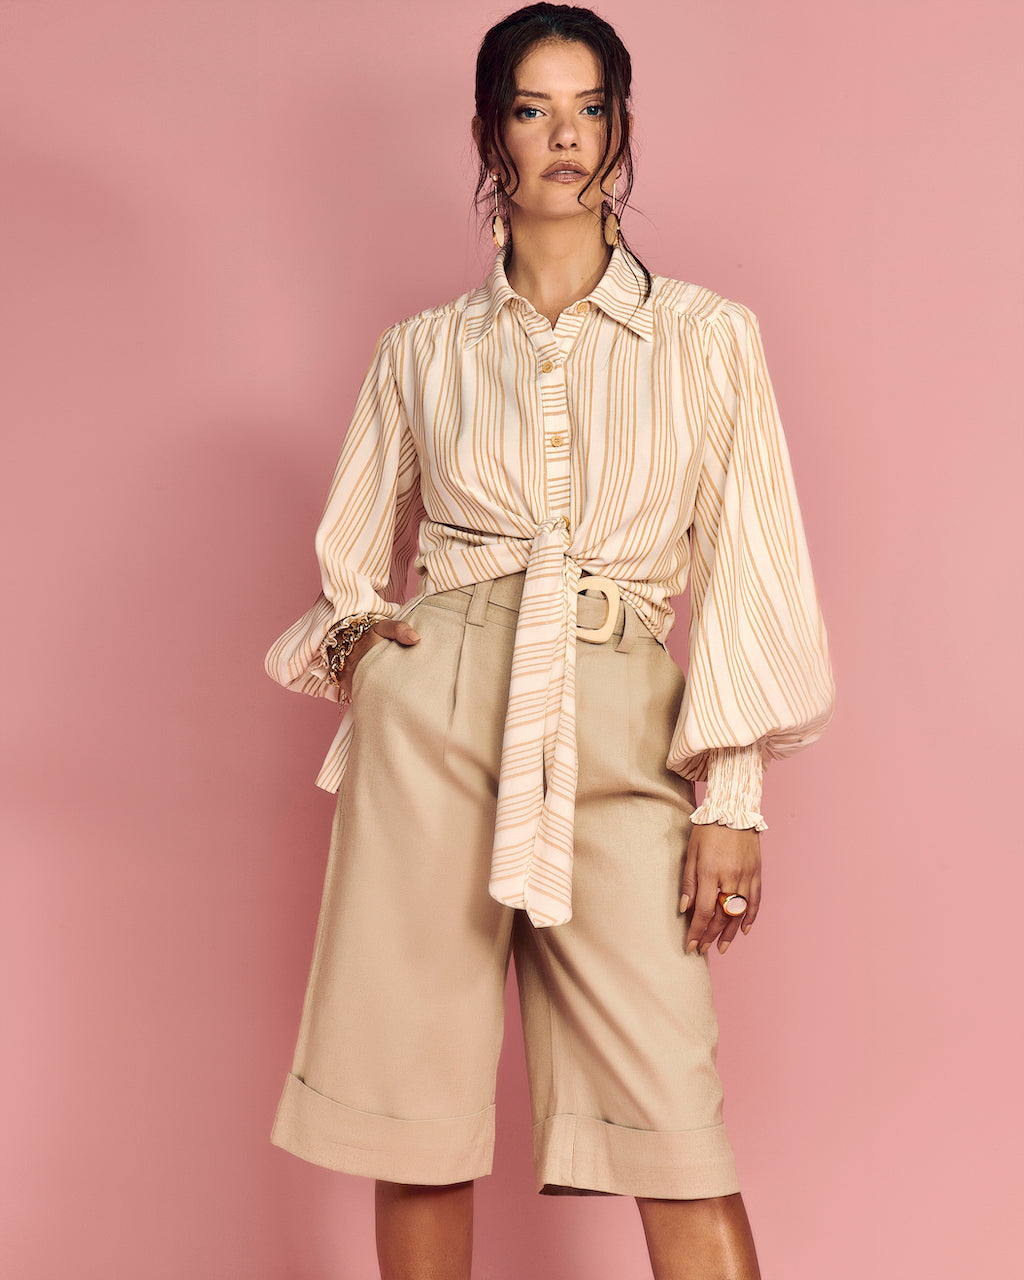 Zara rose pink culottes  Pink culottes, Outfits, Culottes outfit